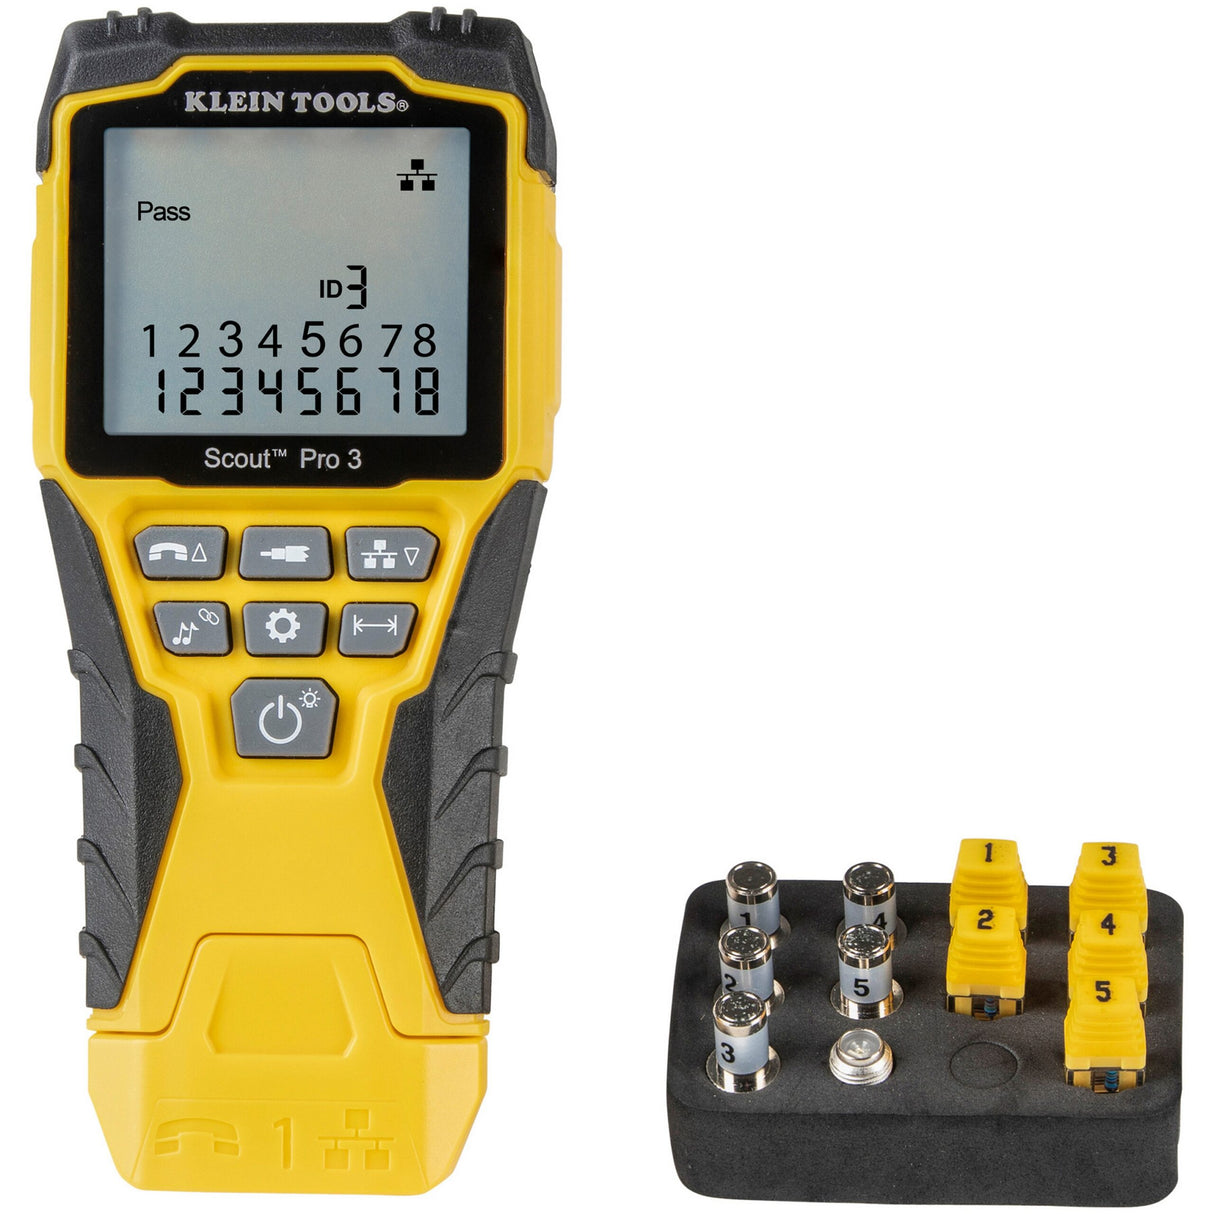 Klein Tools VDV501-851 Scout Pro 3 Cable Tester Kit